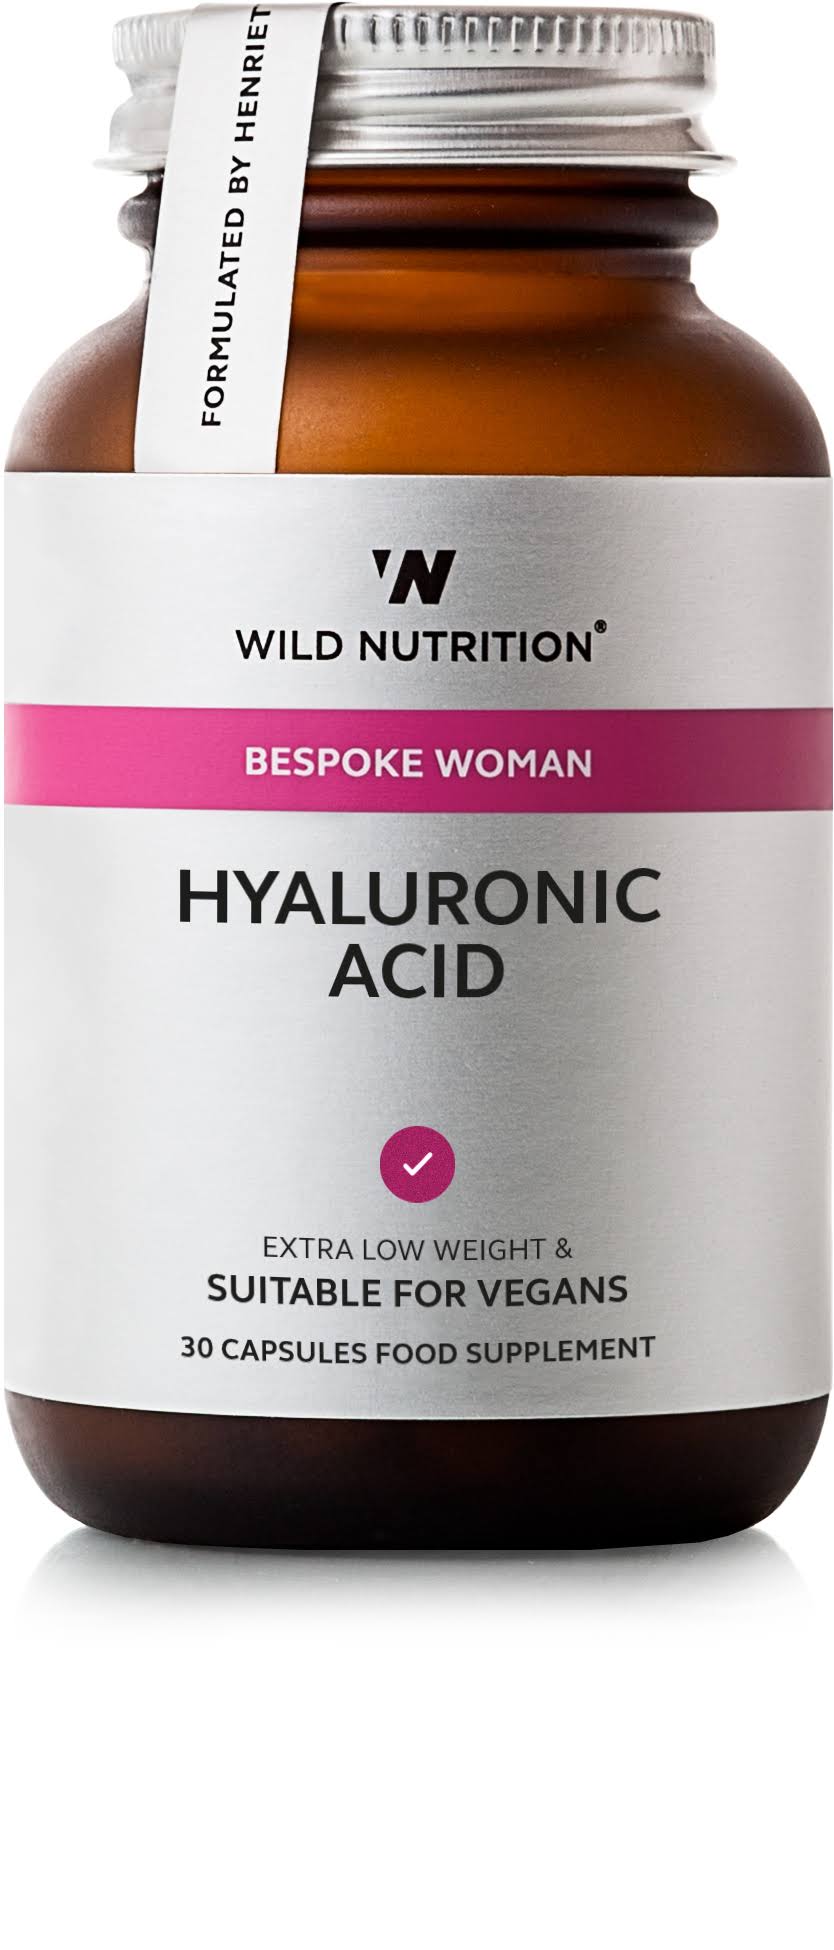 Wild Nutrition Hyaluronic Acid (30 Capsules)